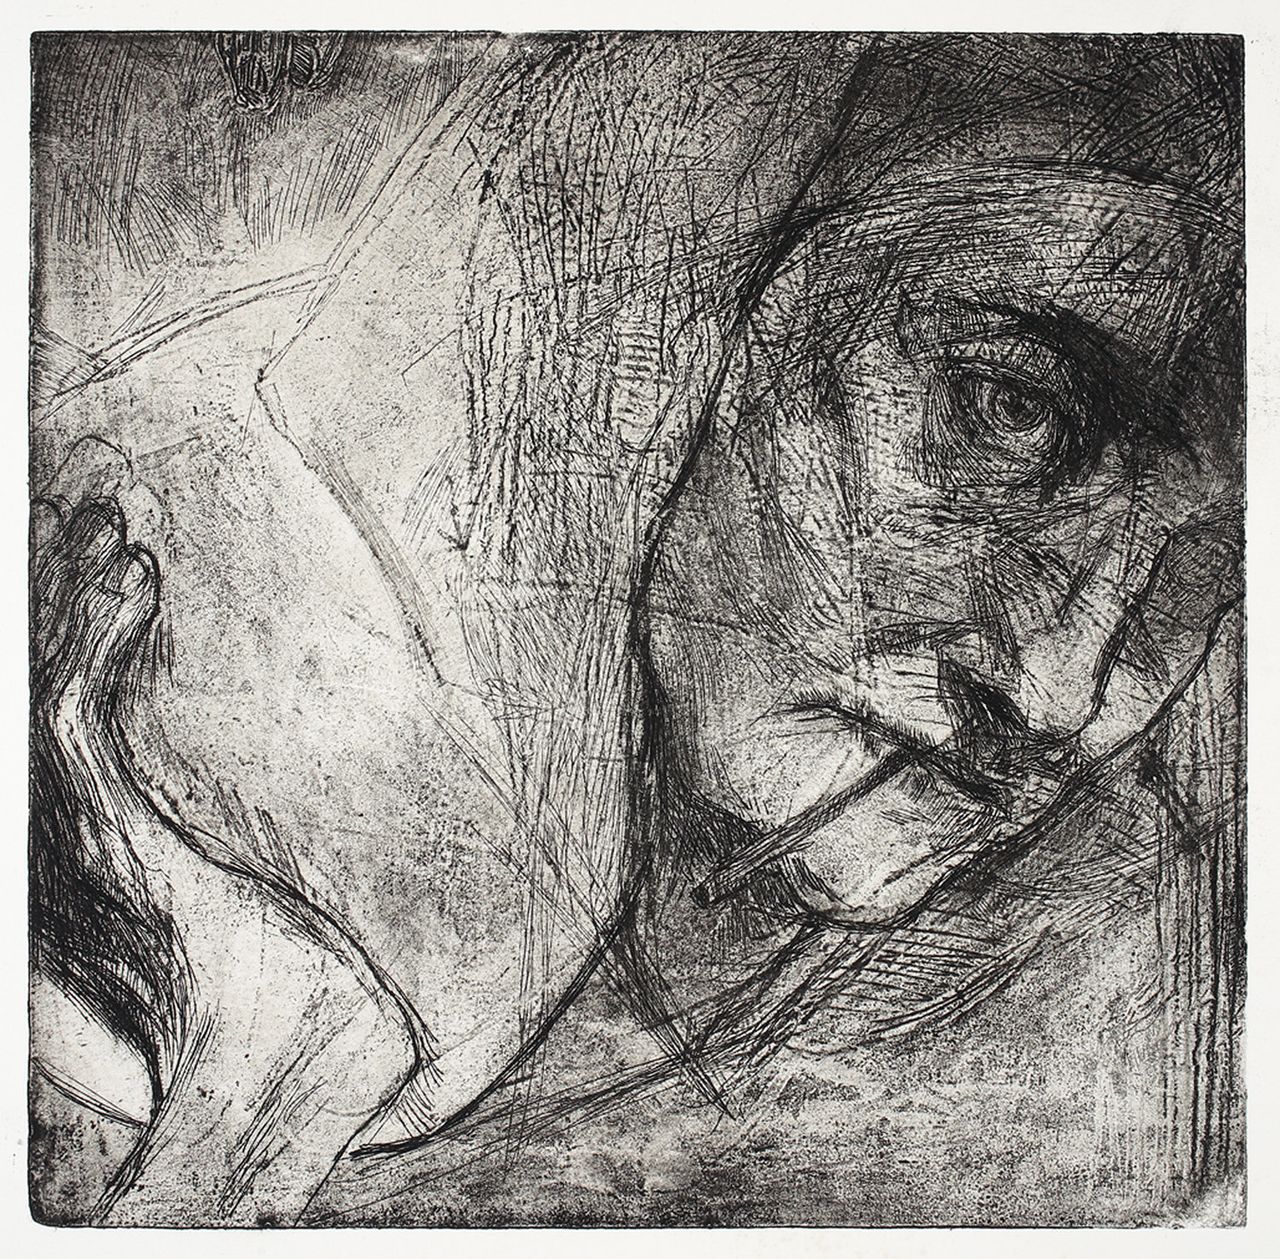 Nomi Silverman, "Woman with Satchel", 2015, intaglio, 12 by 12 inches, Edition: 7, $200.